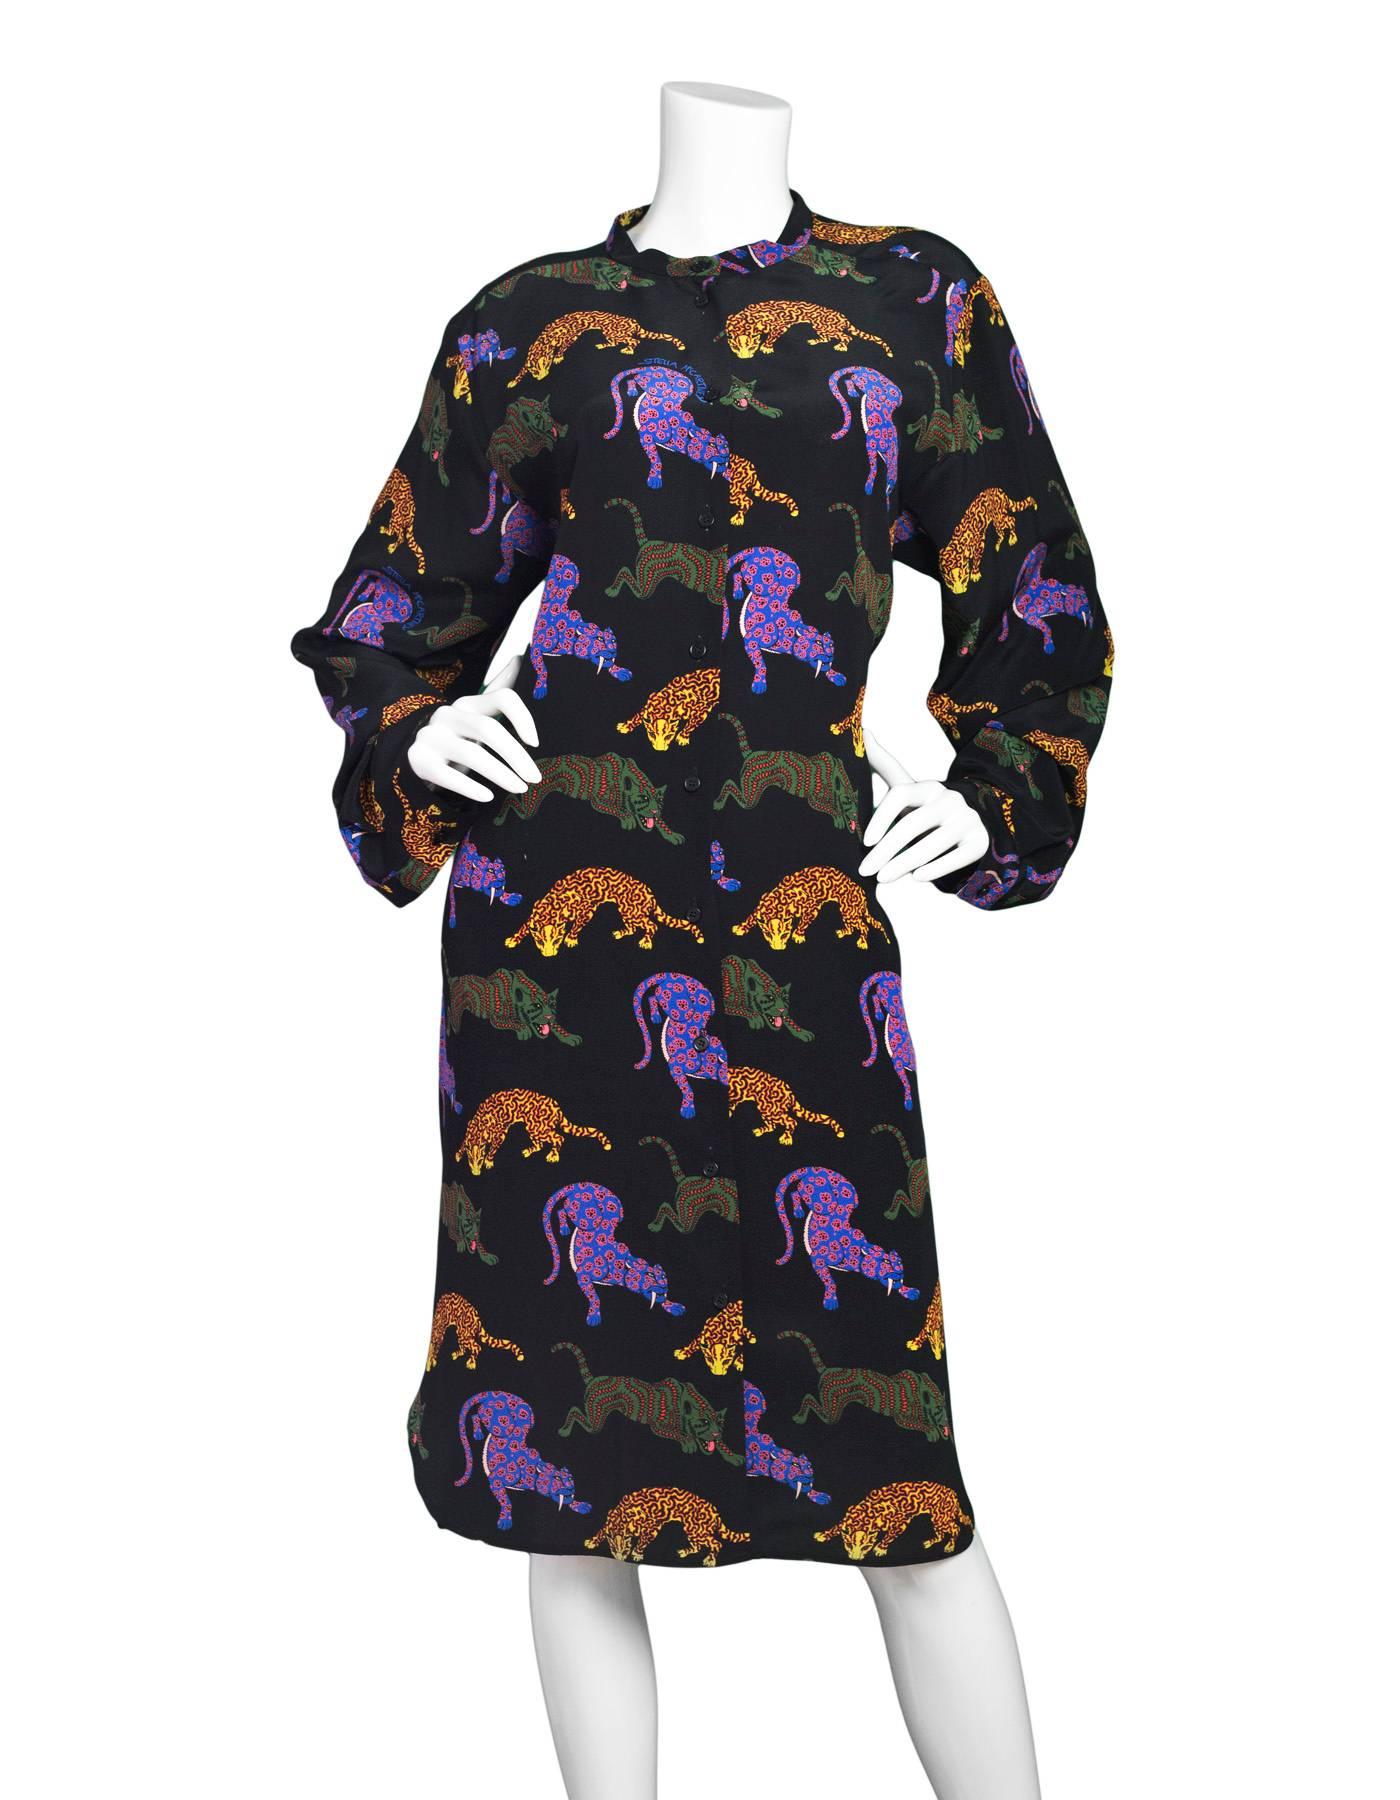 Stella McCartney Black Silk Wild Cats Dress Sz IT50 NWT

Made In: Hungary
Color: Black, multi
Composition: 100% Silk
Lining: None
Closure/Opening: Front button closure
Retail Price: $1,230 + tax
Overall Condition: Excellent pre-owned condition -